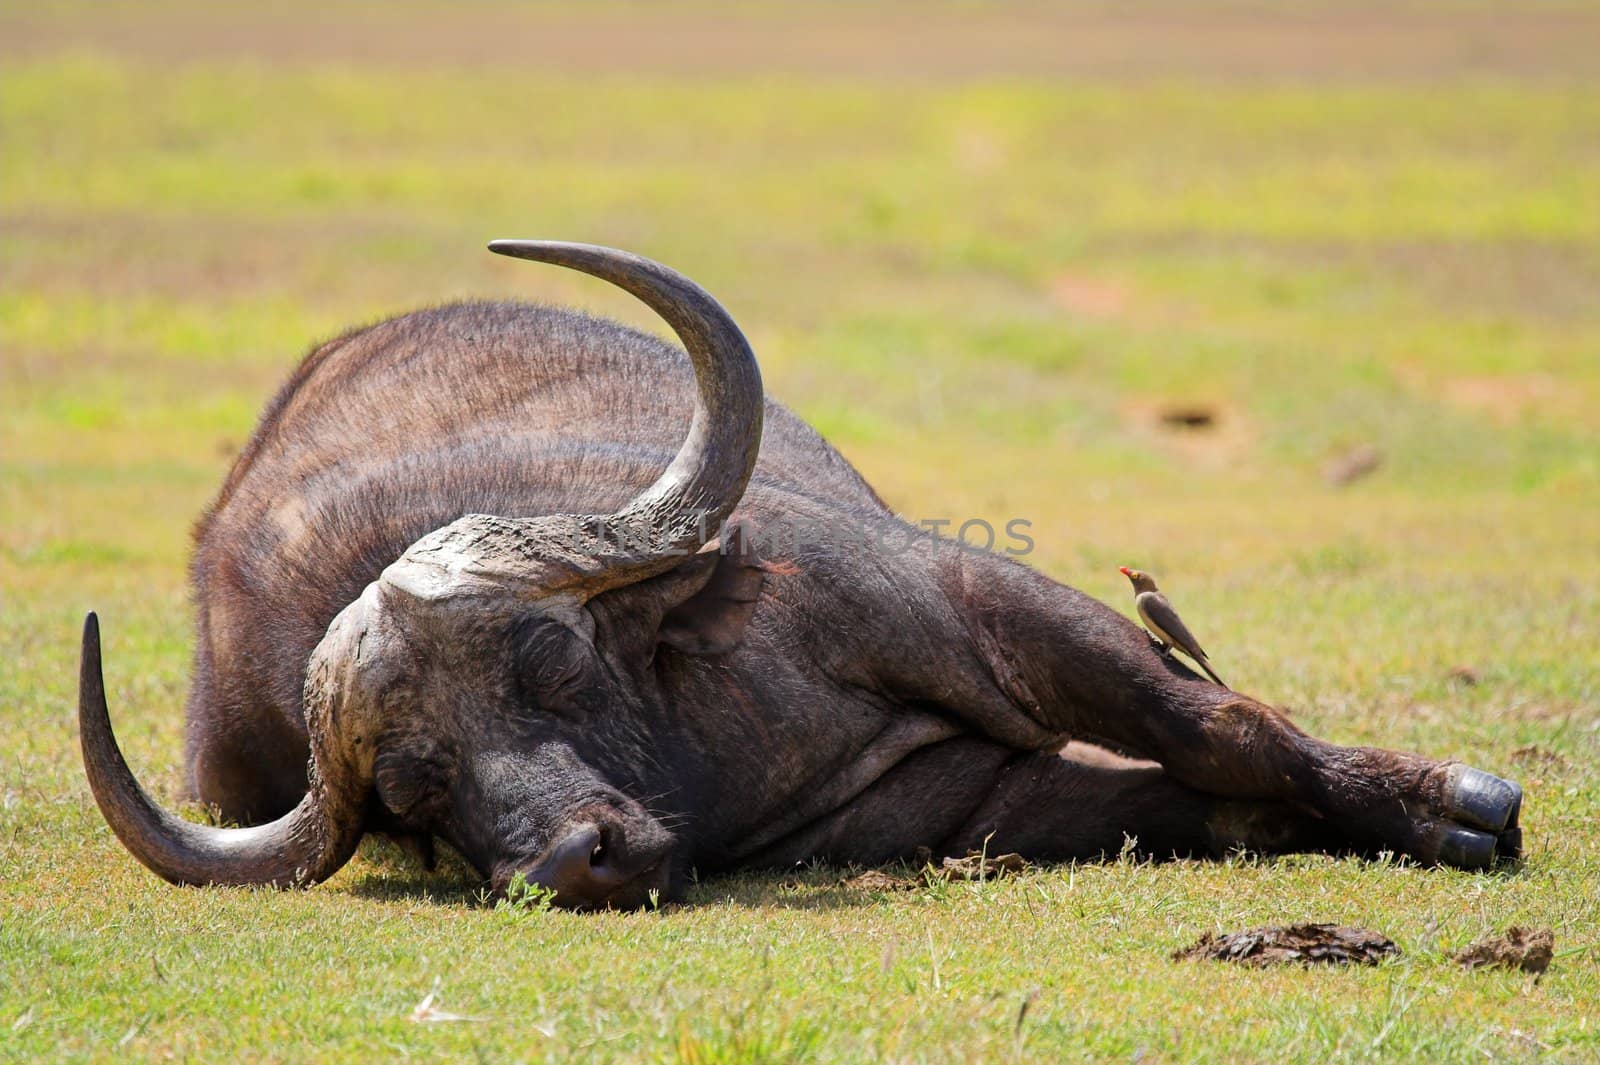 Cape Buffalo sleeping while being groomed by a red billed oxpecker